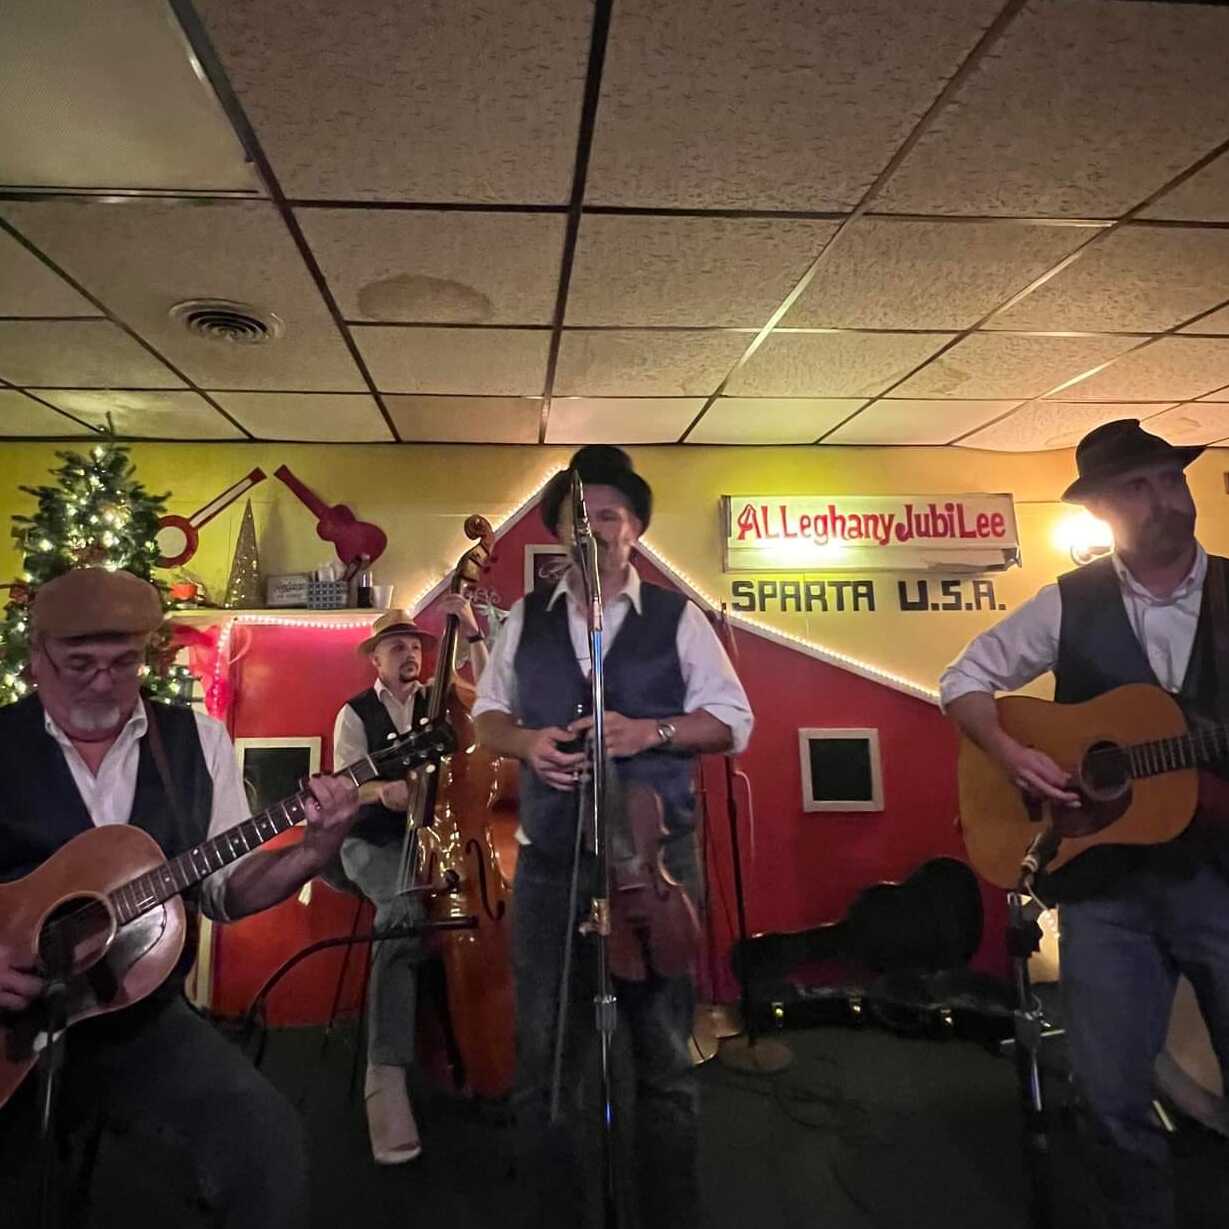 Gap Civil is an oldtime and traditional country band from Sparta, NC